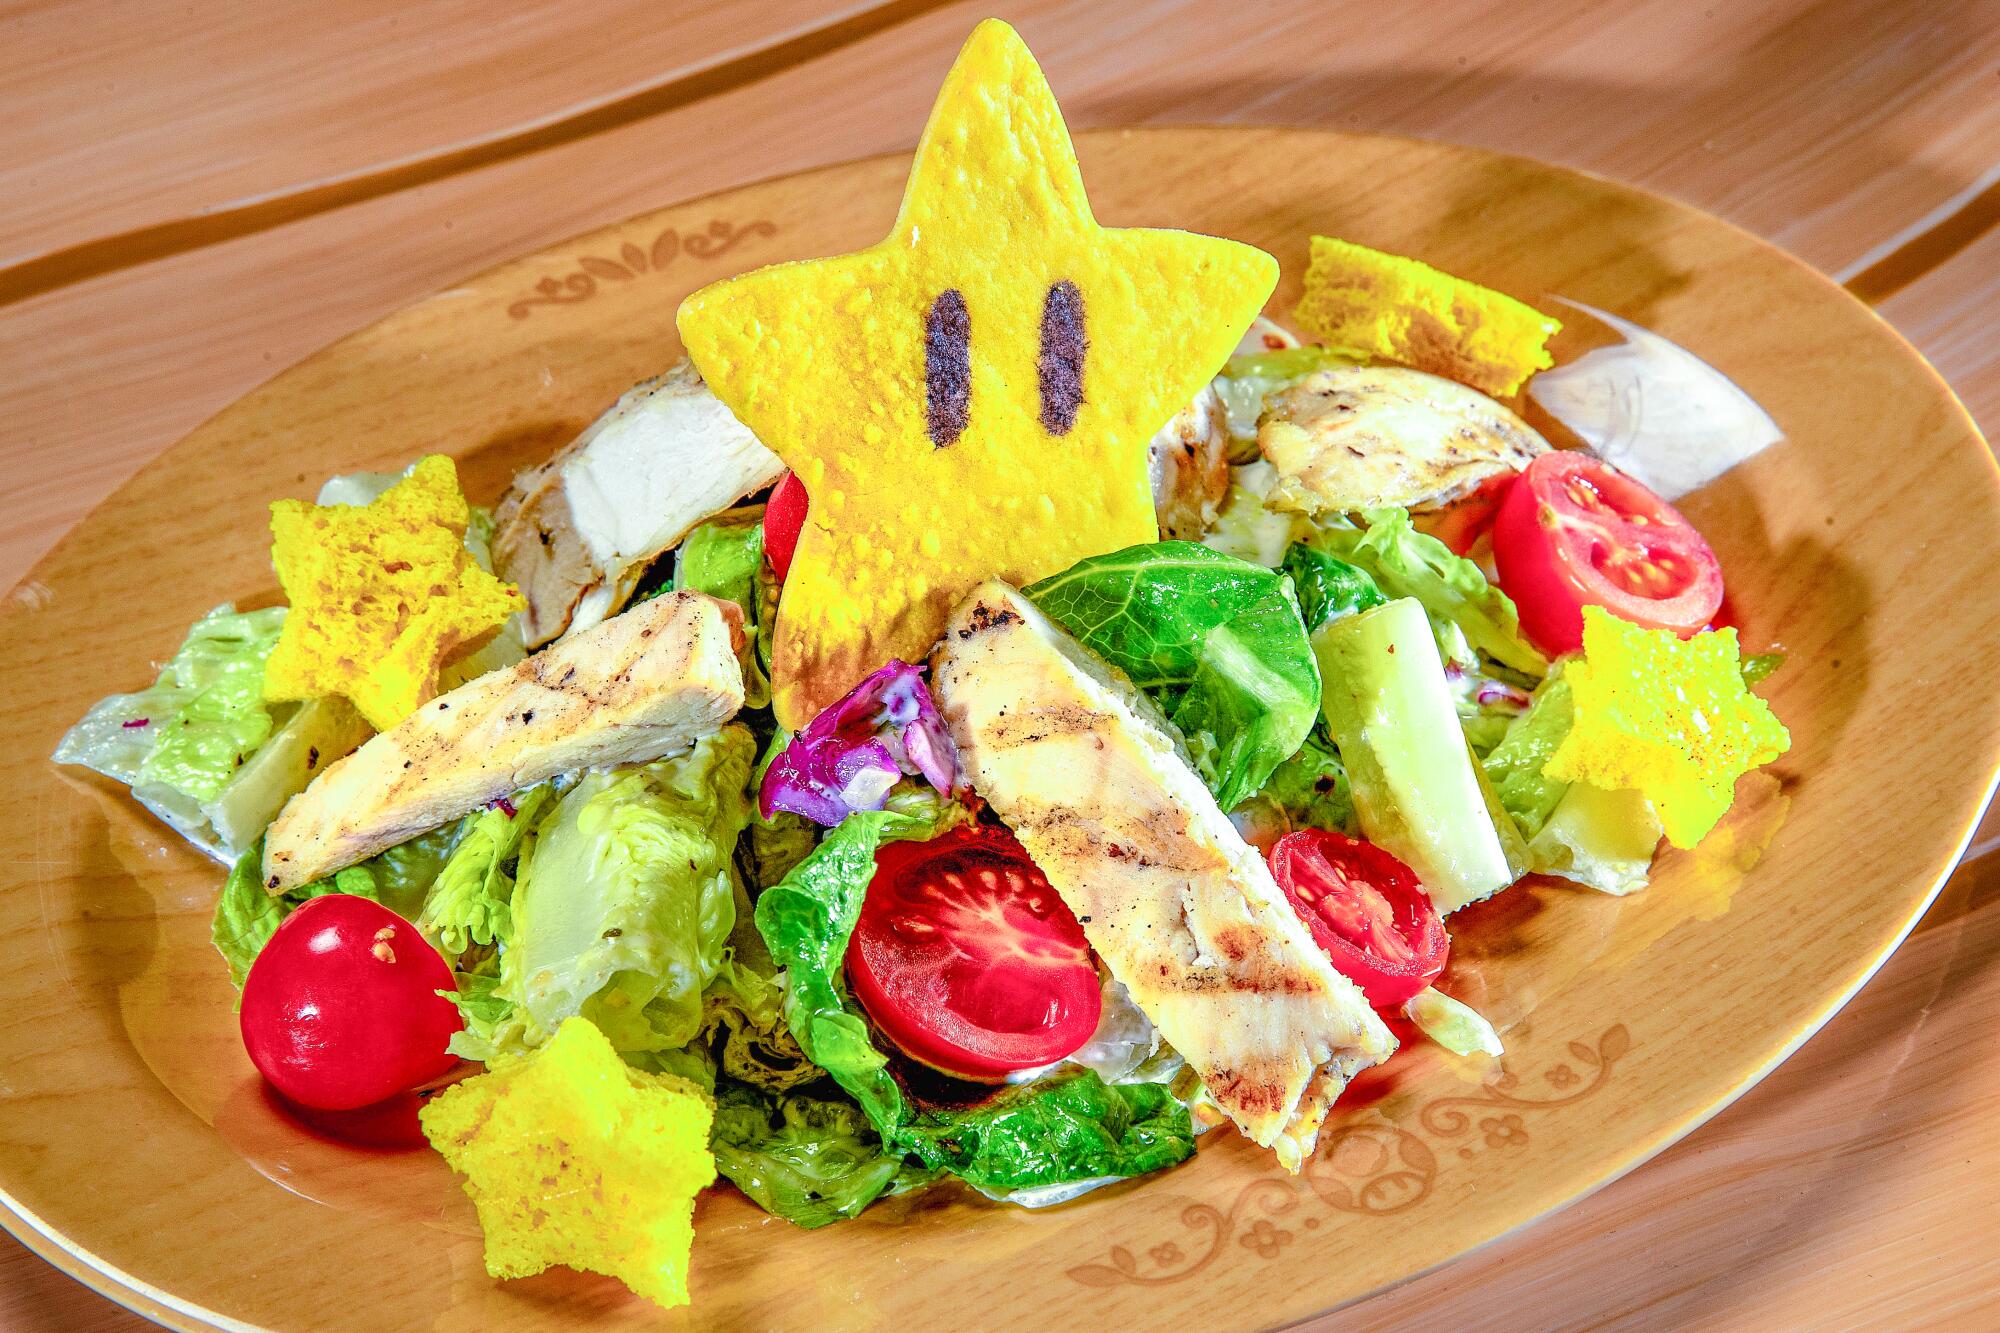 Super Star Chicken Salad is on the menu at Toadstool Cafe.